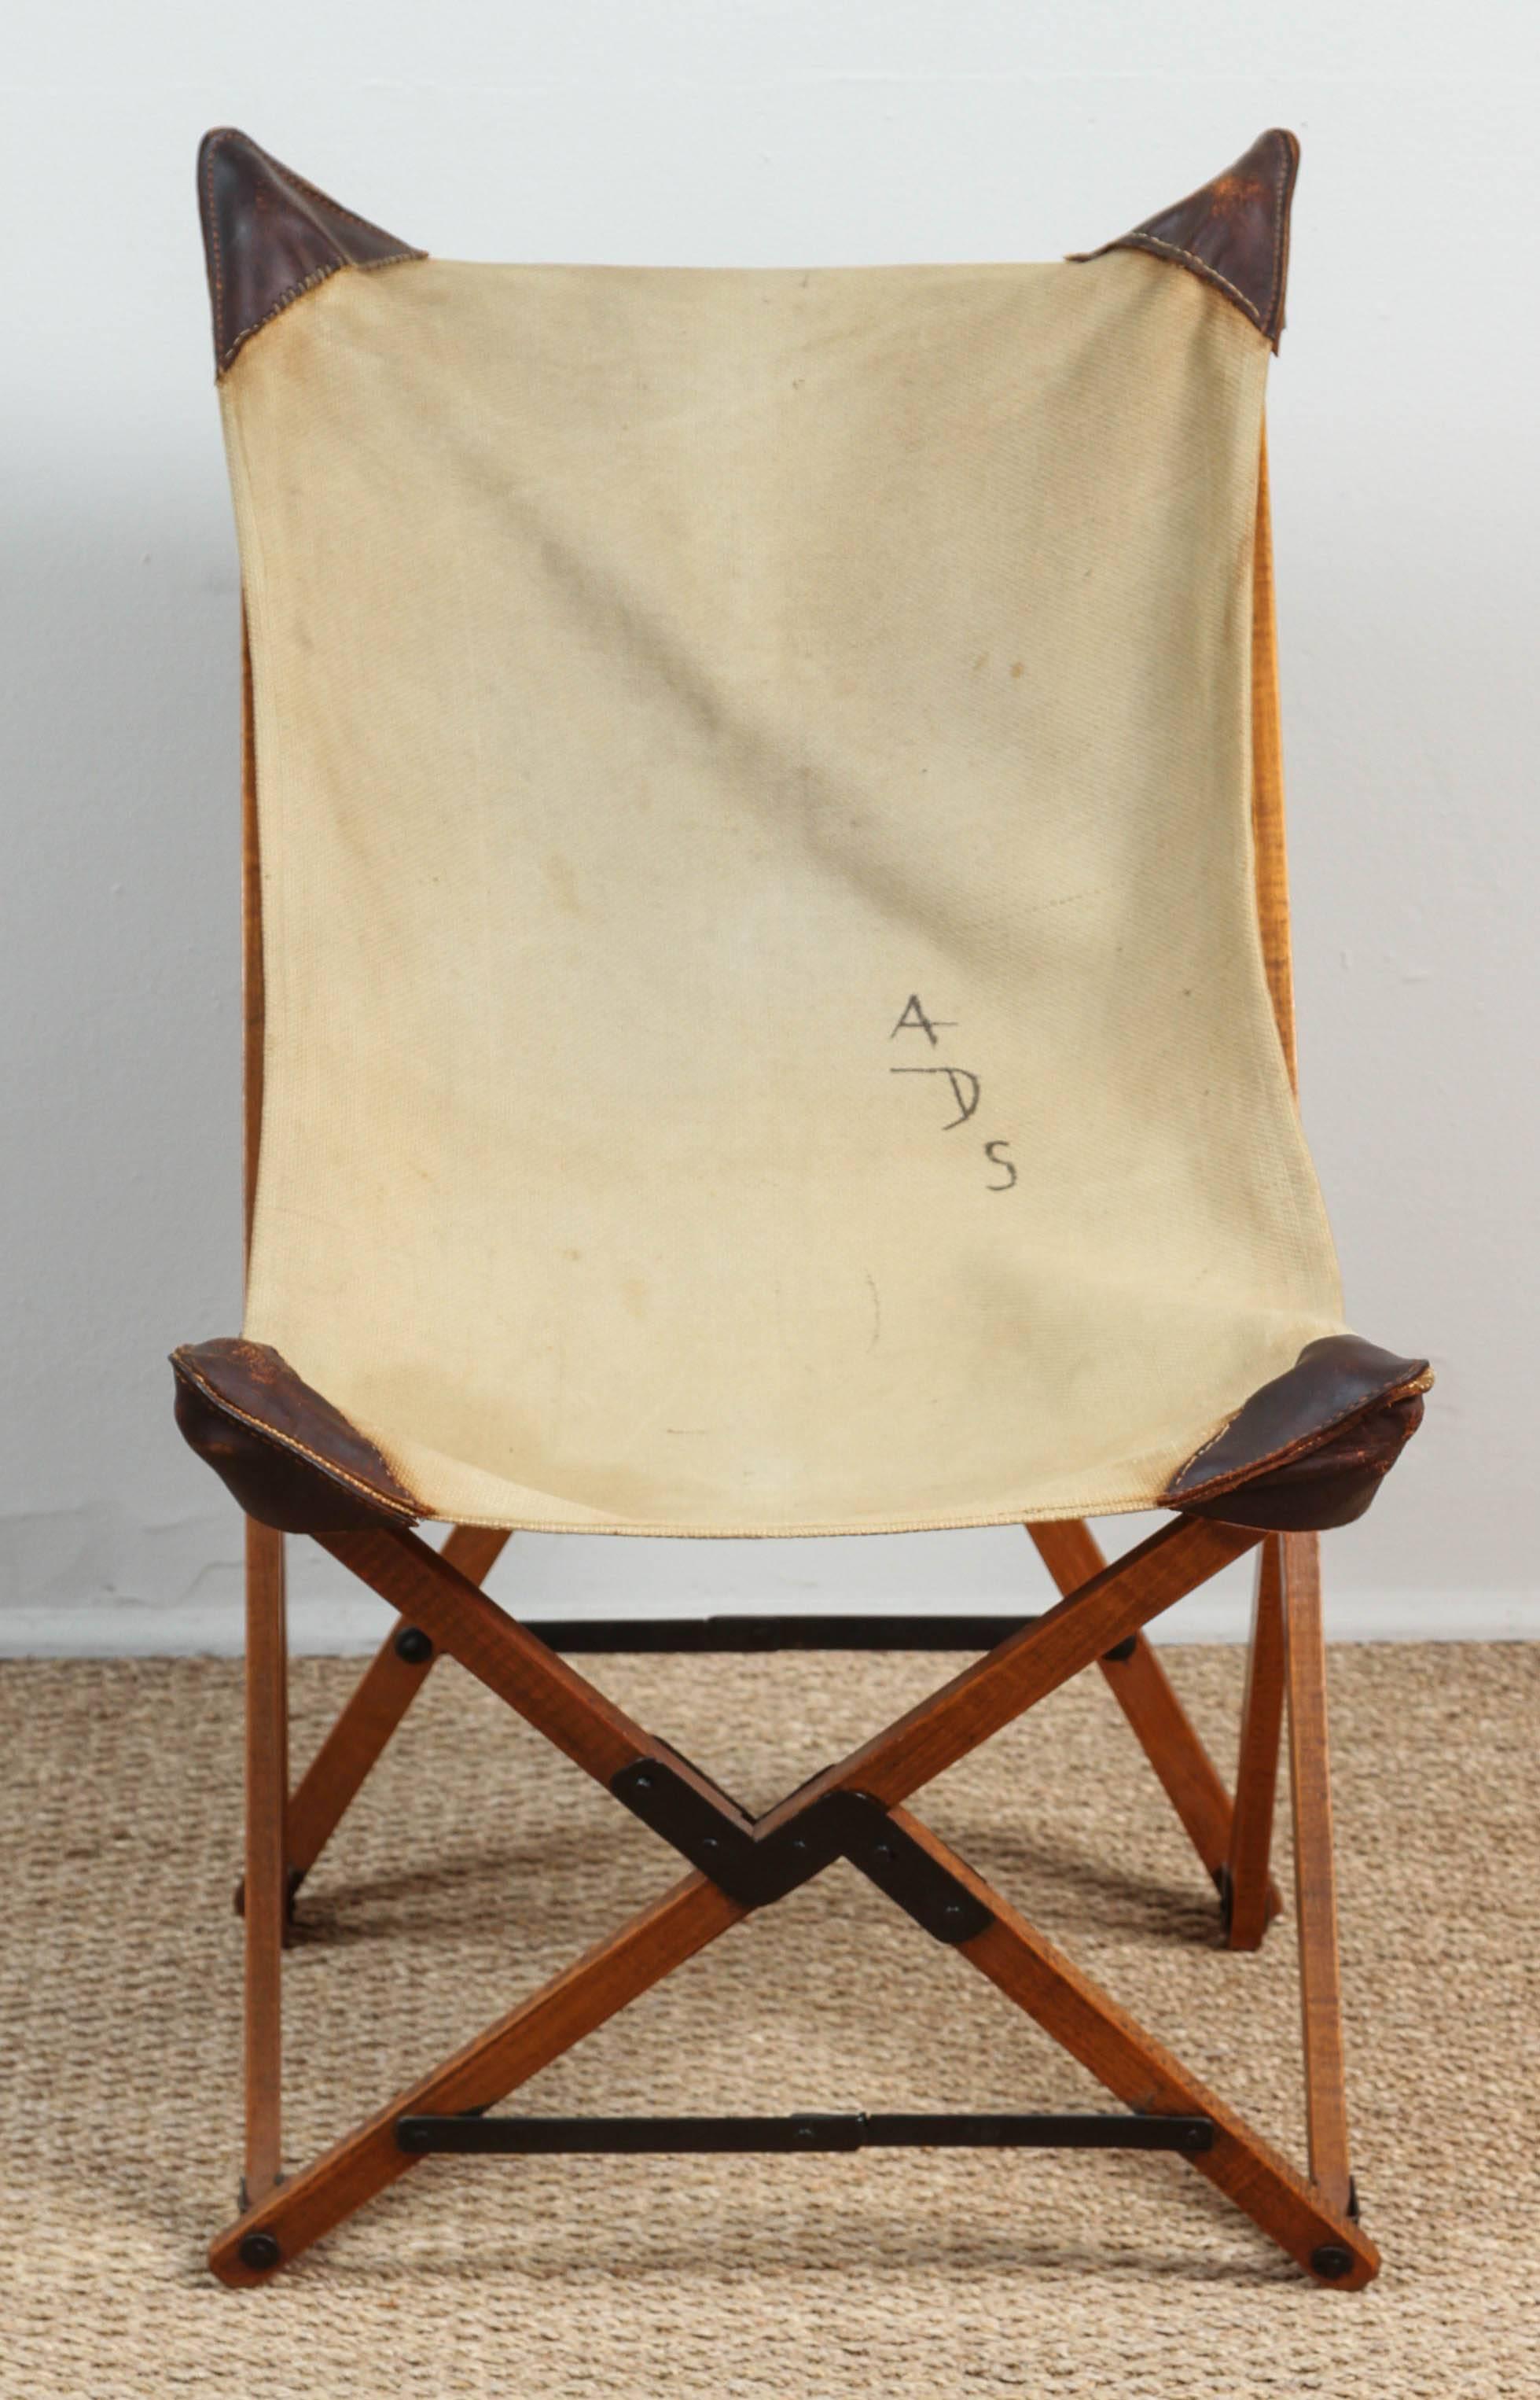 Campaign chair with original heavy canvas seat. Initials ADS painted on to seat fabric. Leather corners have been hand re-sewn. Wooden base with metal hinges folds into a neat pile of sticks. Surprisingly sturdy.